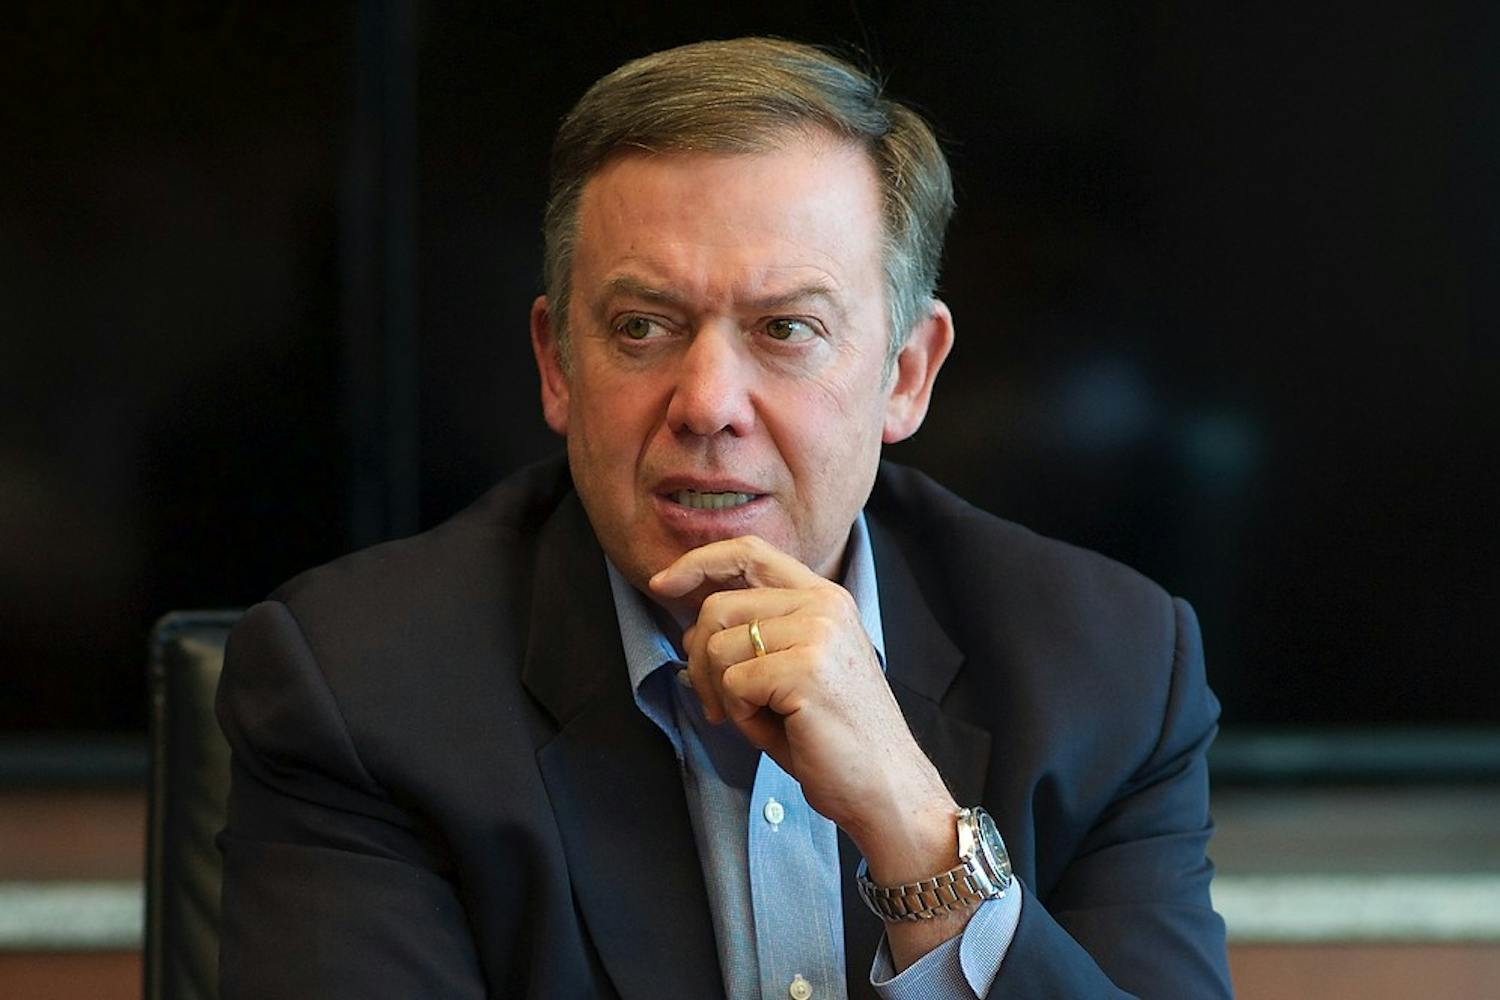 ASU President Michael Crow meets with The State Press editorial board on Friday, April 3, 2015 at the Fulton Center in Tempe. (Ben Moffat/The State Press)